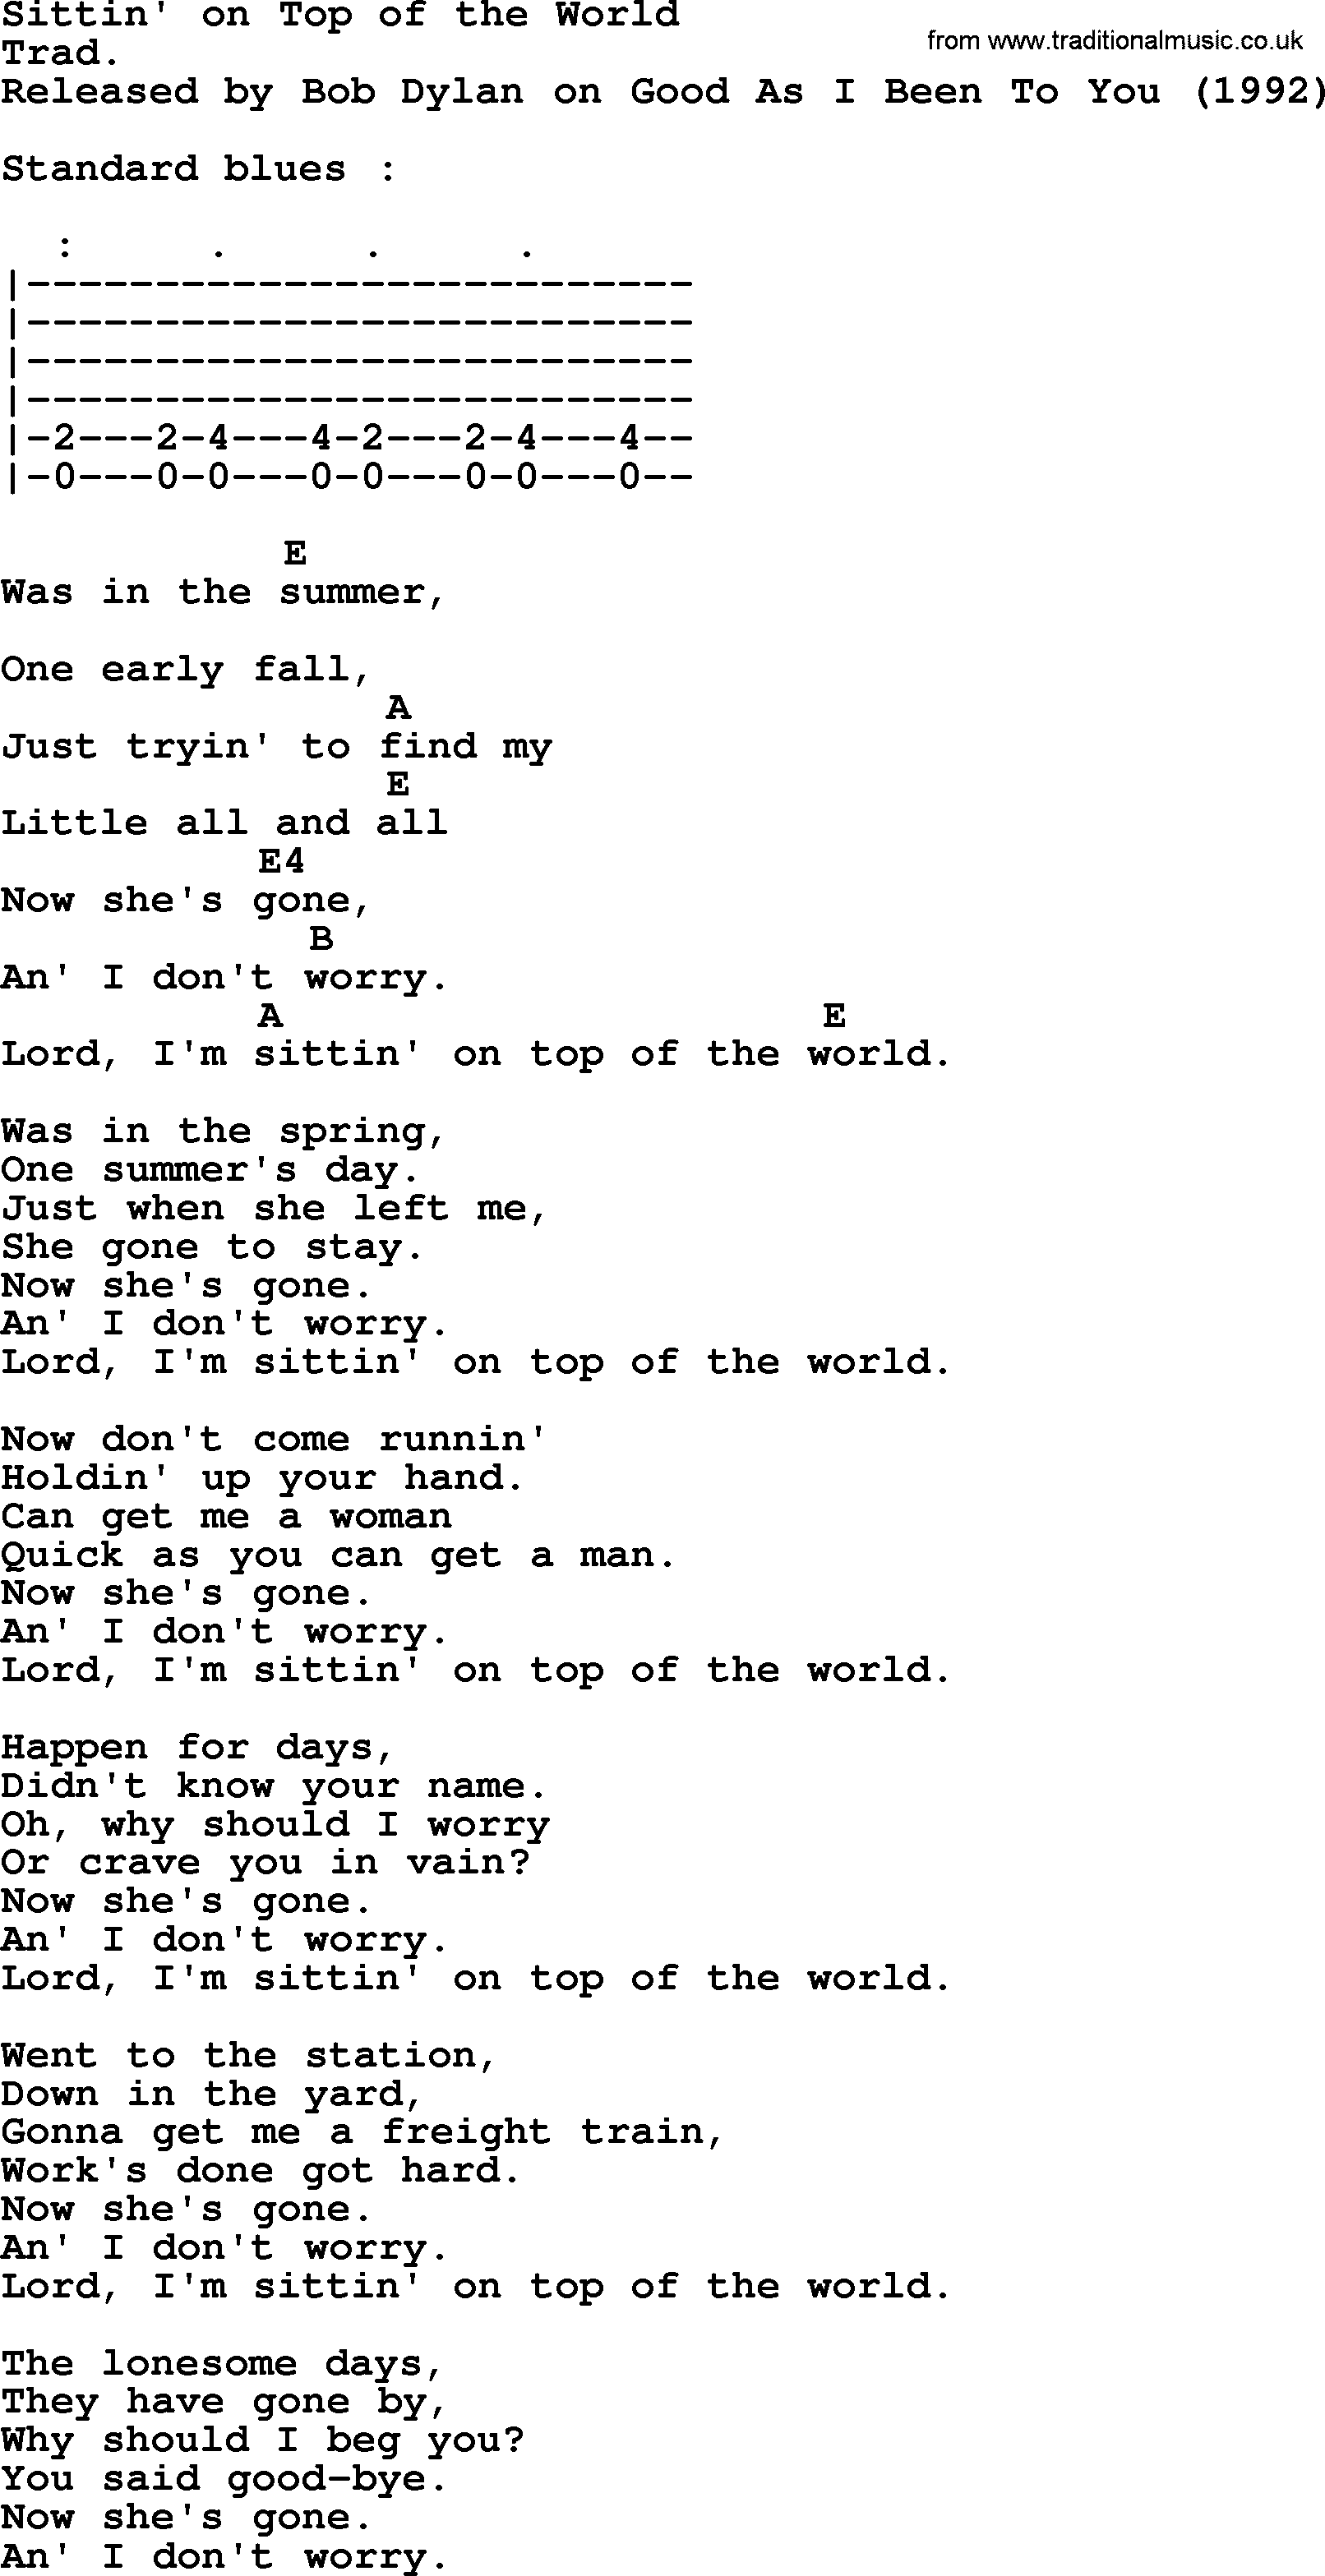 Bob Dylan song, lyrics with chords - Sittin' on Top of the World